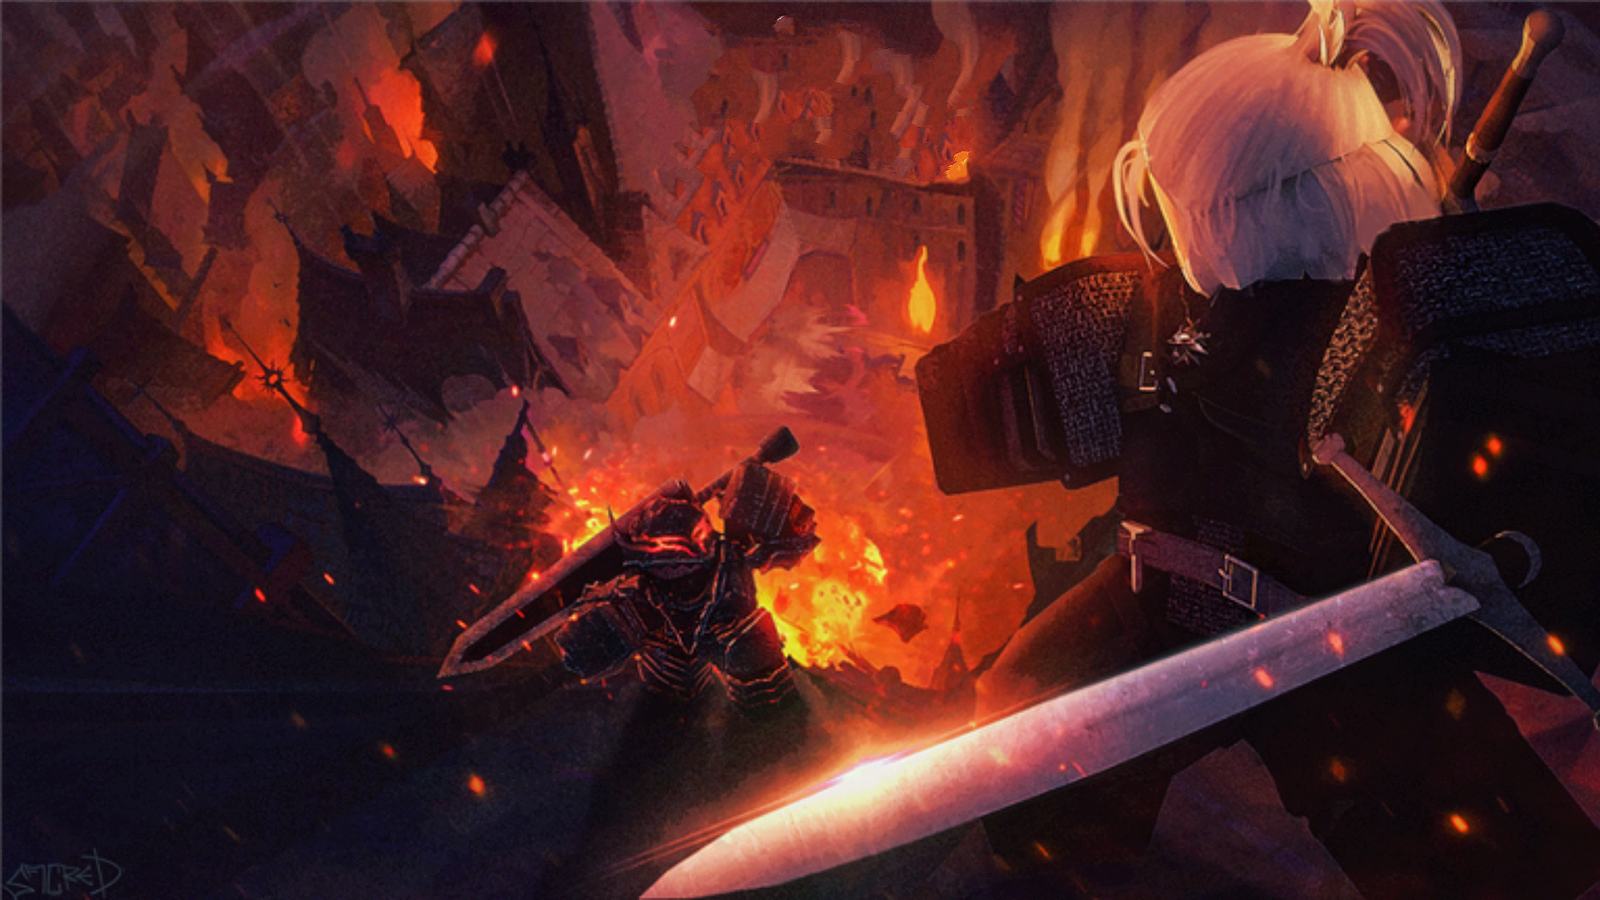 Roblox character holding a sword, standing over a knight above a pit of fire.